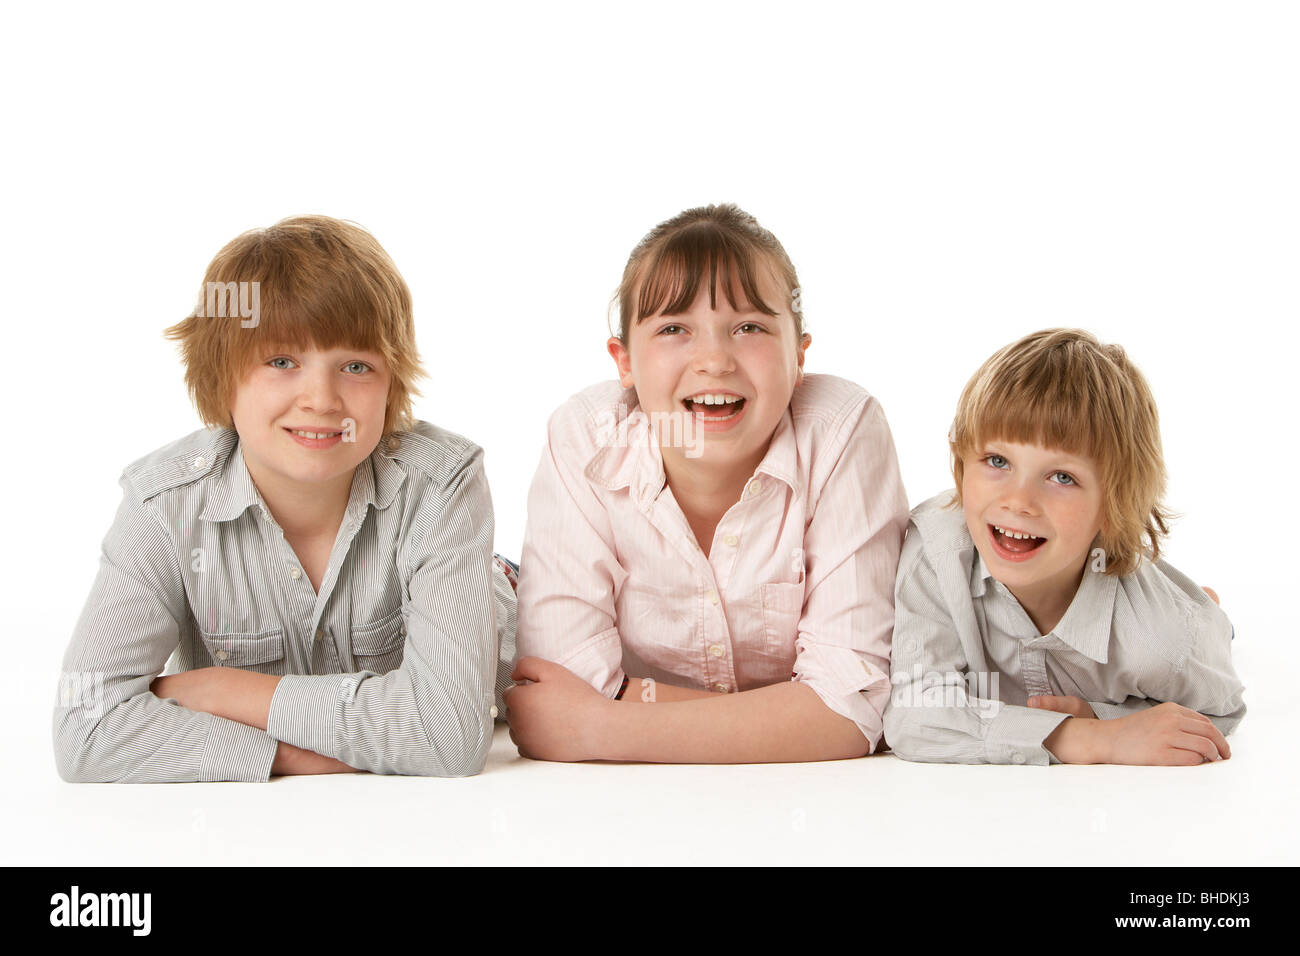 Studio Portrait Of Brothers And Sister Stock Photo